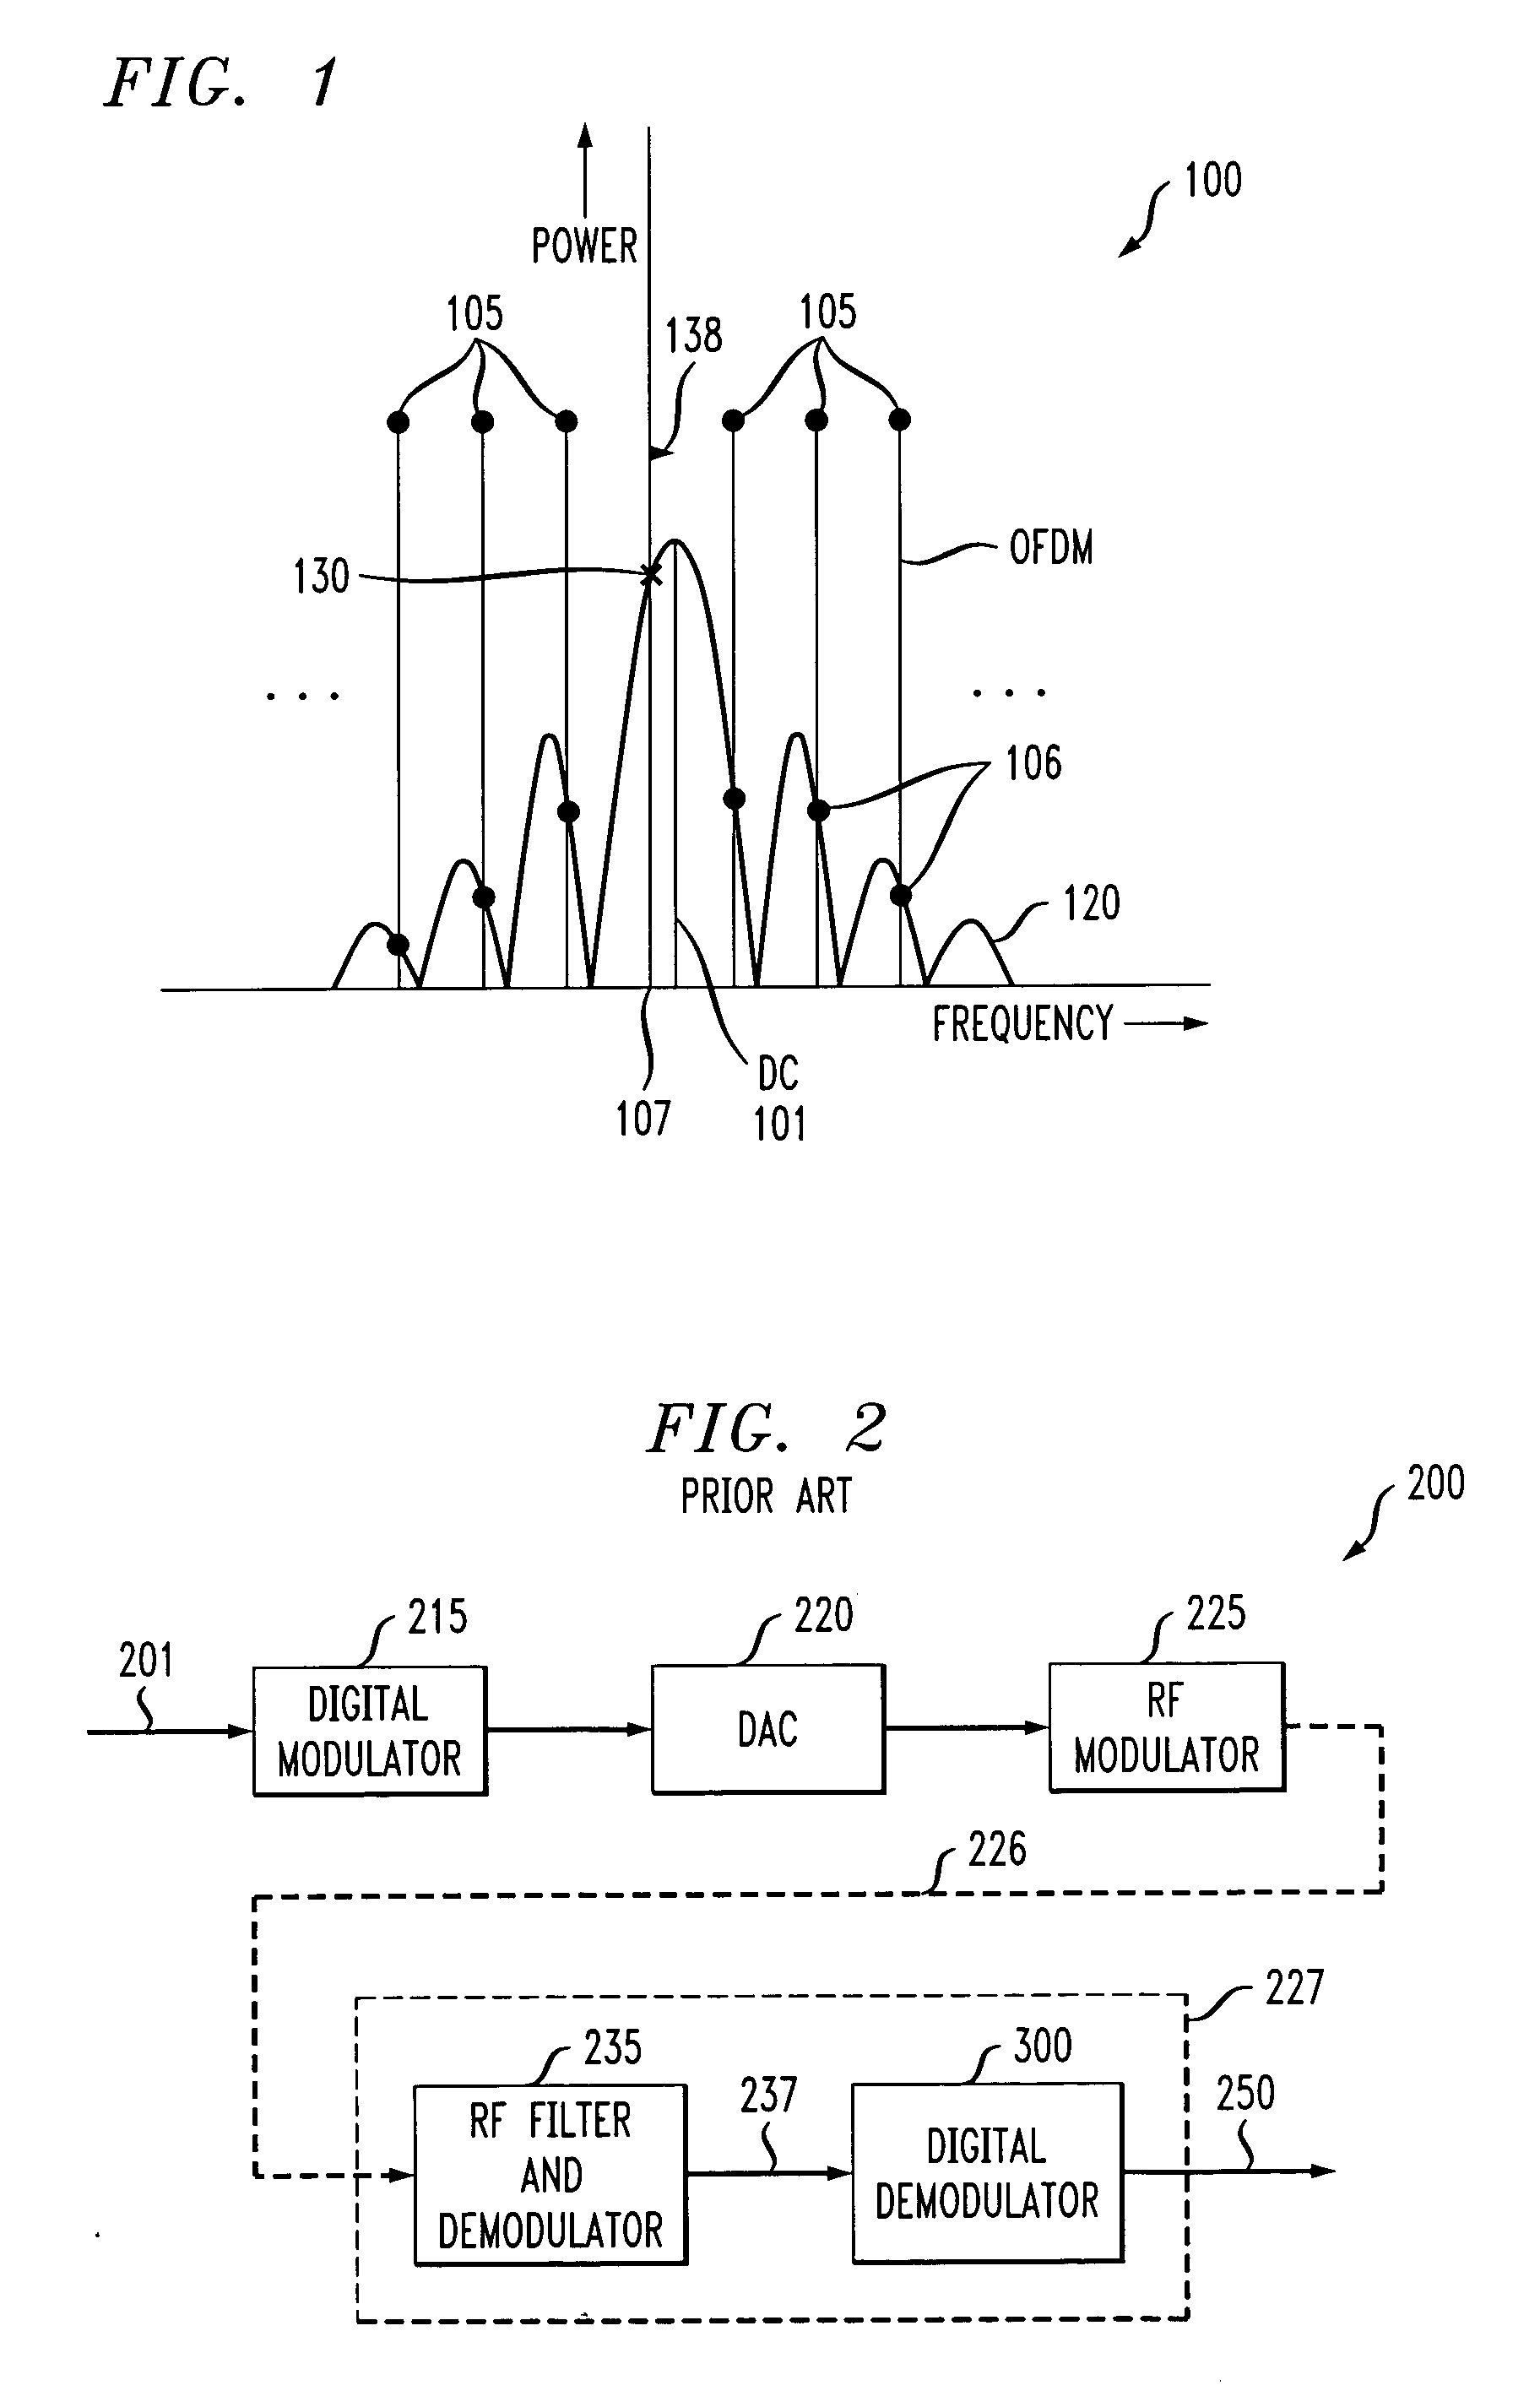 Method and apparatus for estimating DC offset in an orthogonal frequency division multiplexing system